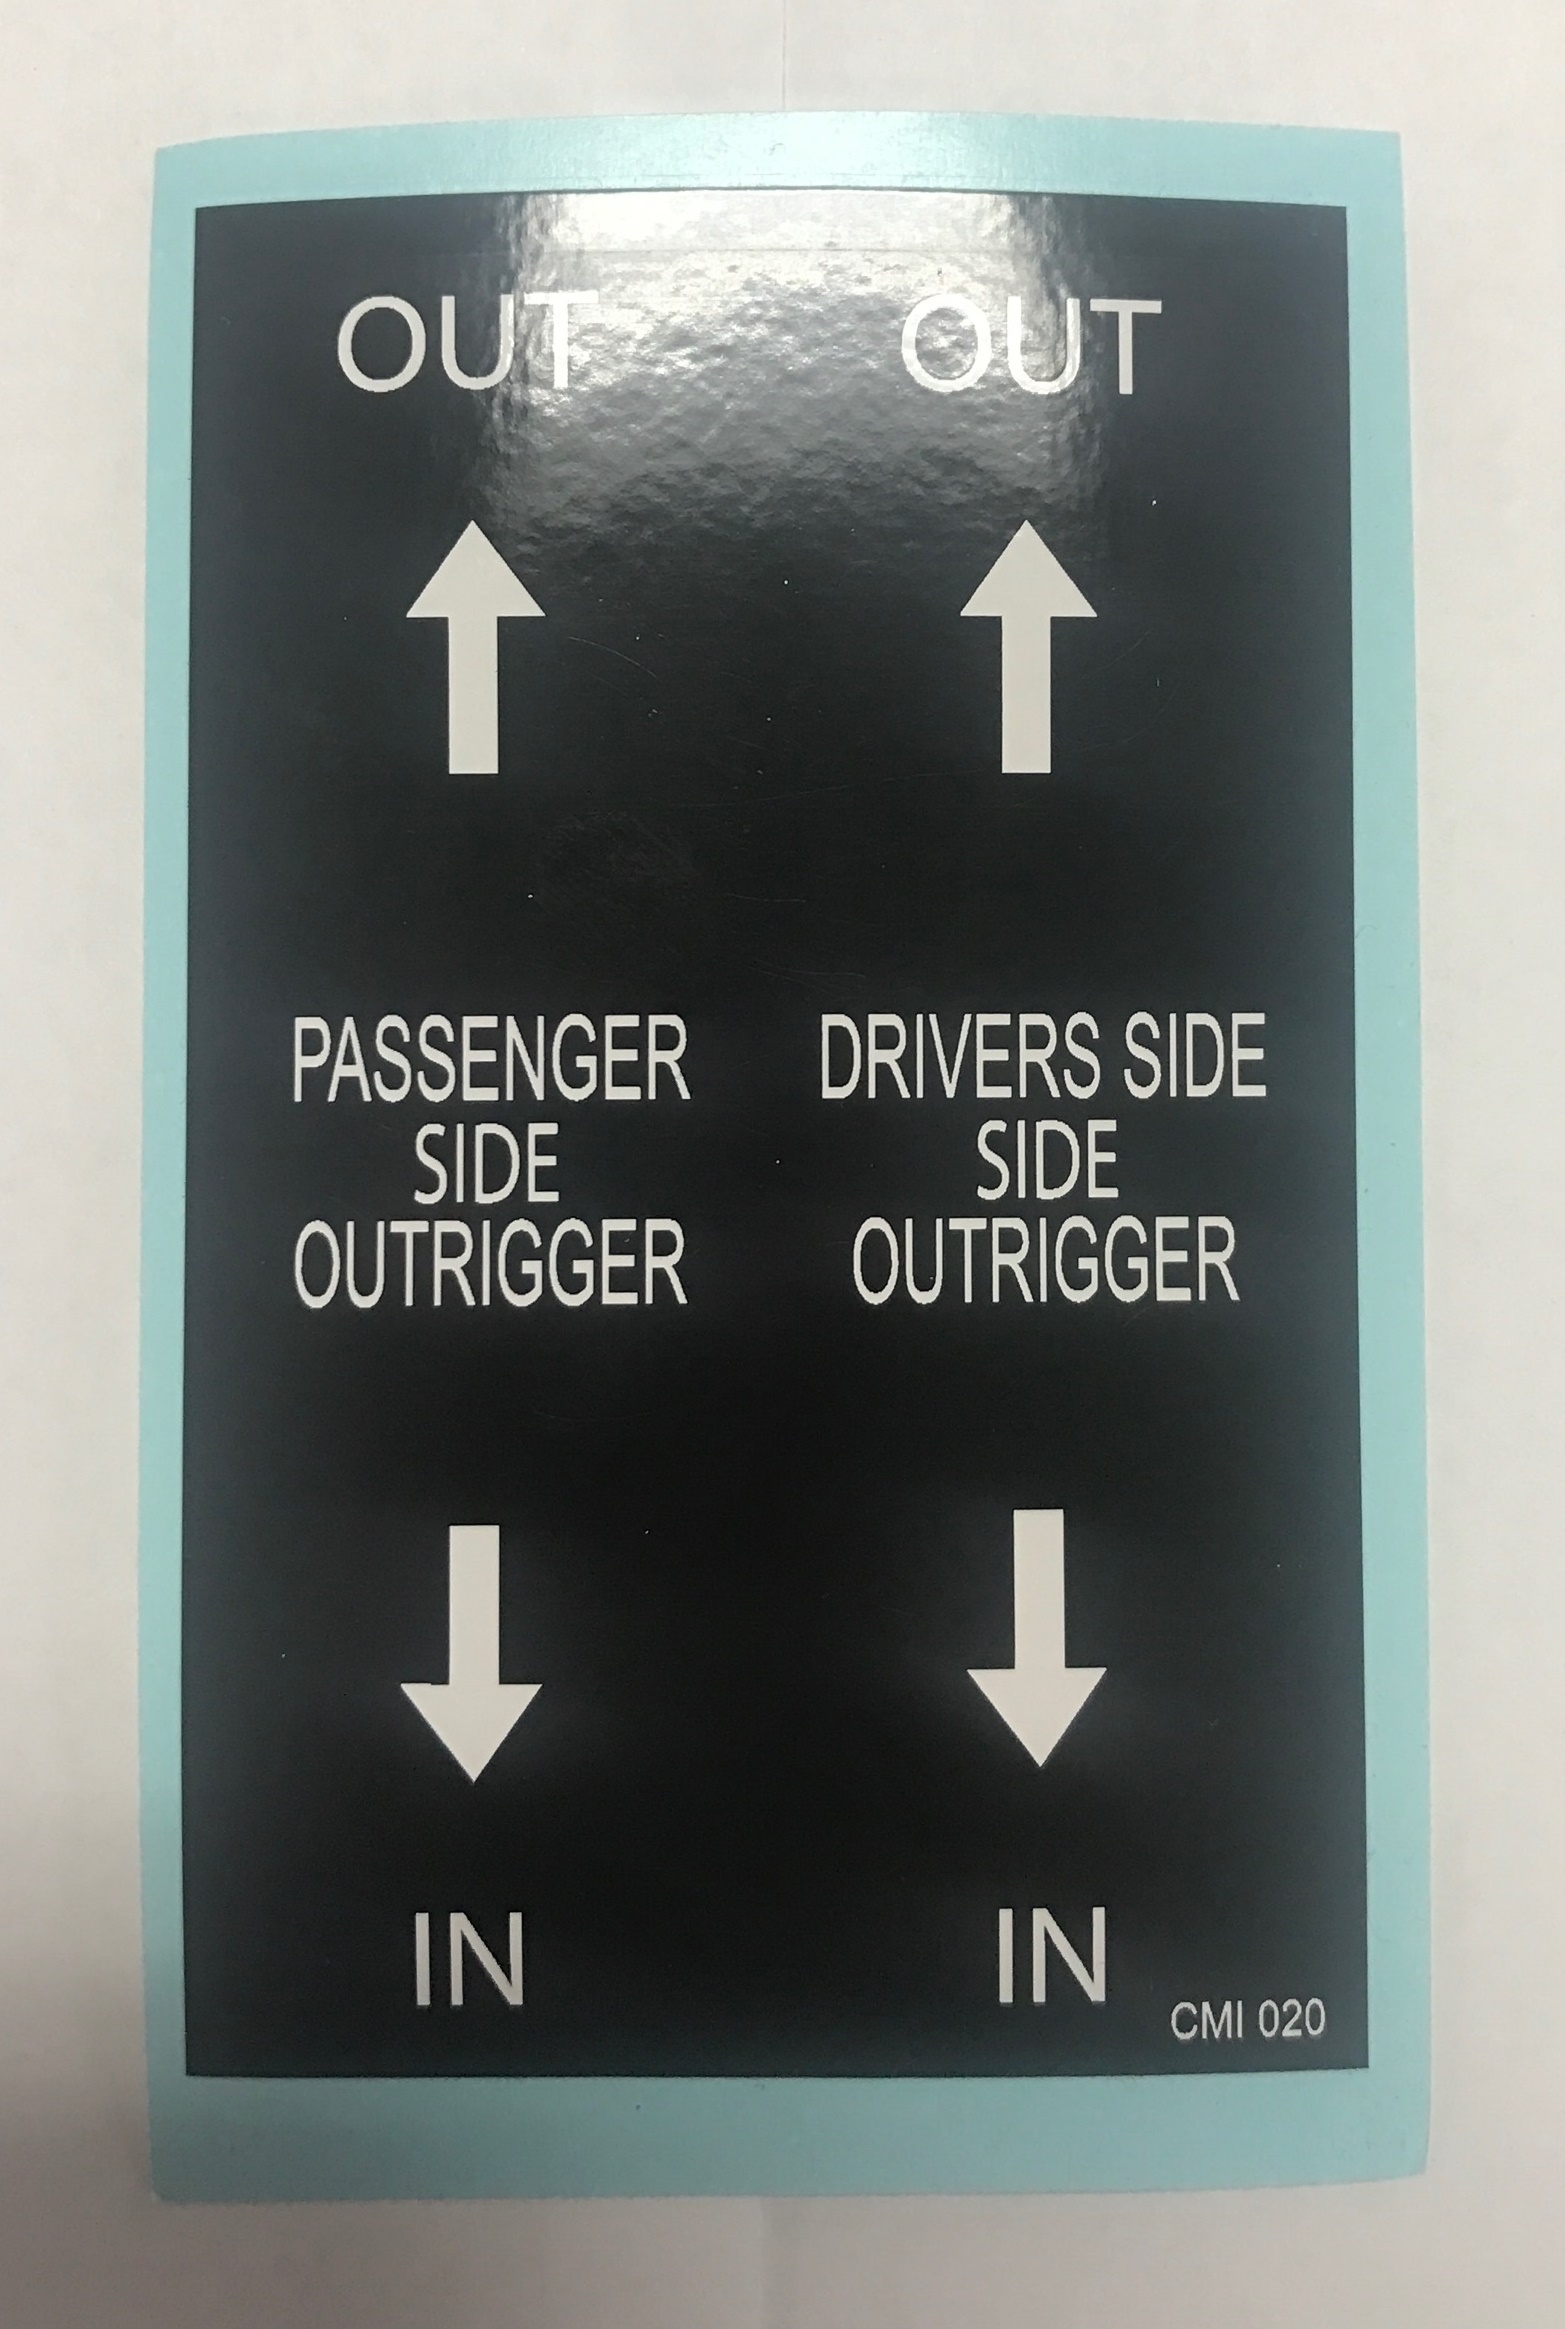 Decal - Dump Trailer Outriggers - 2.5" x 4" (White on Black)